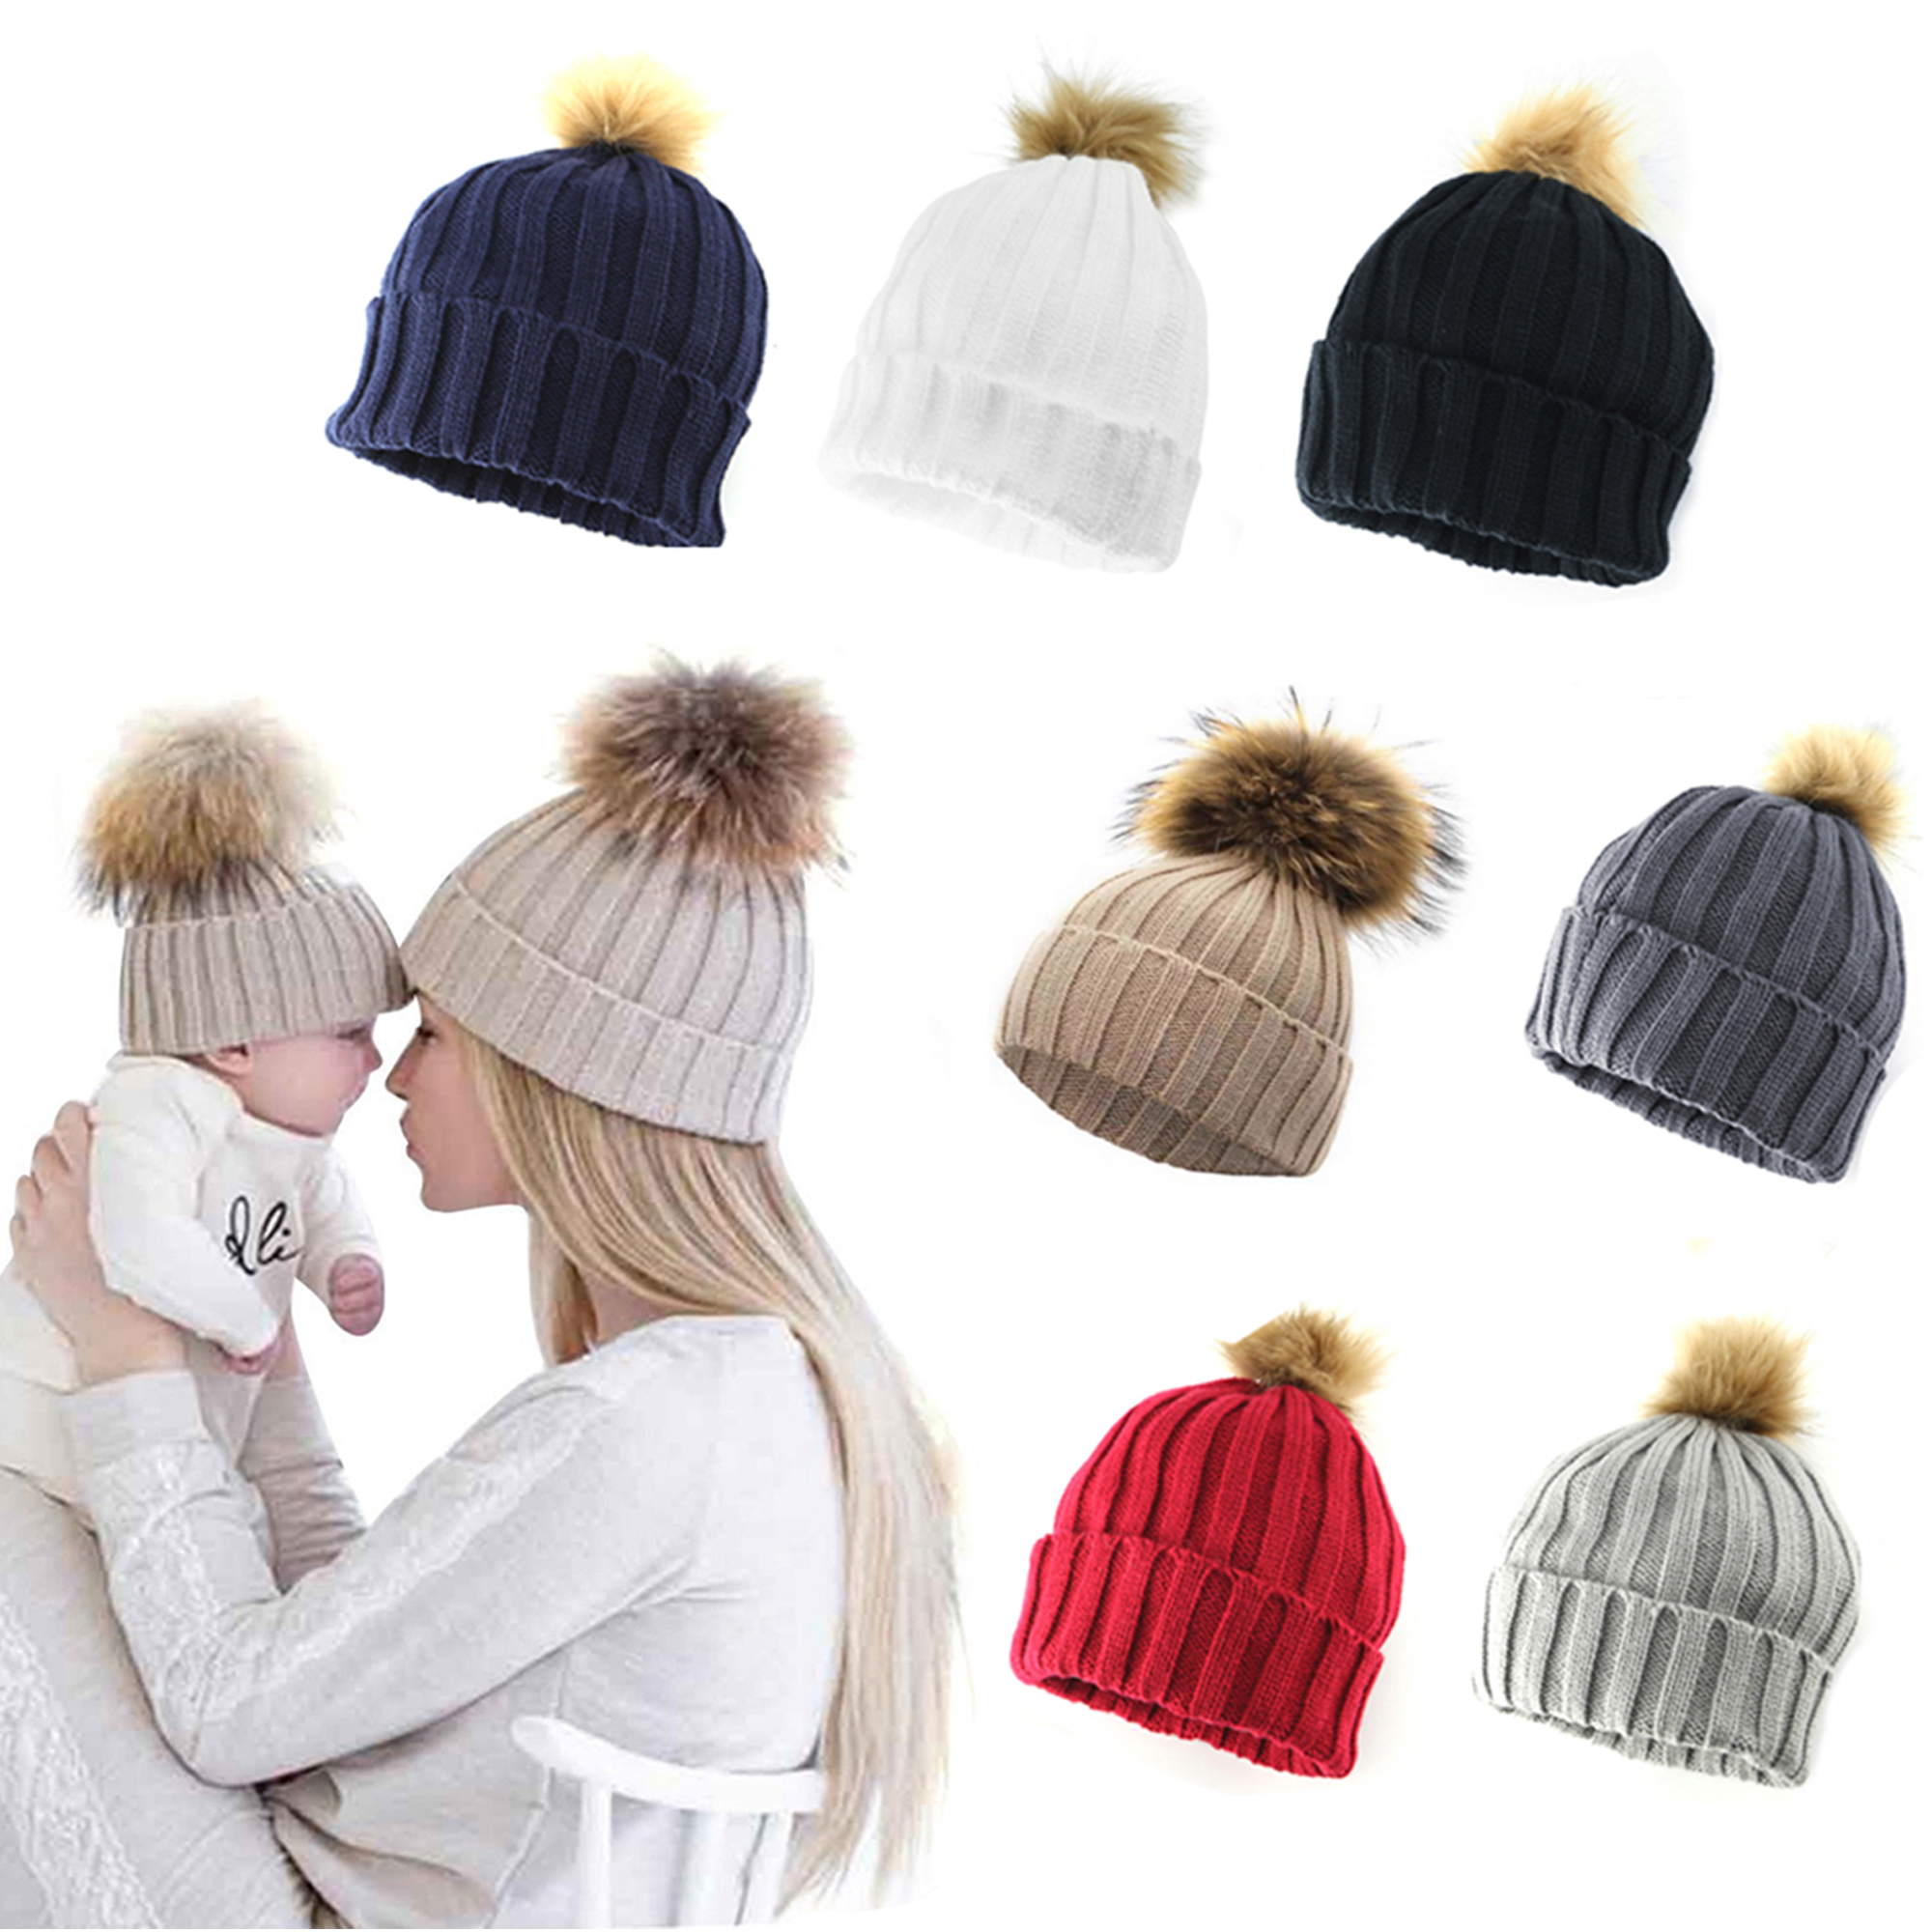 Women/'s adult knit hat  adult beanie women/'s winter hat  red and white hat